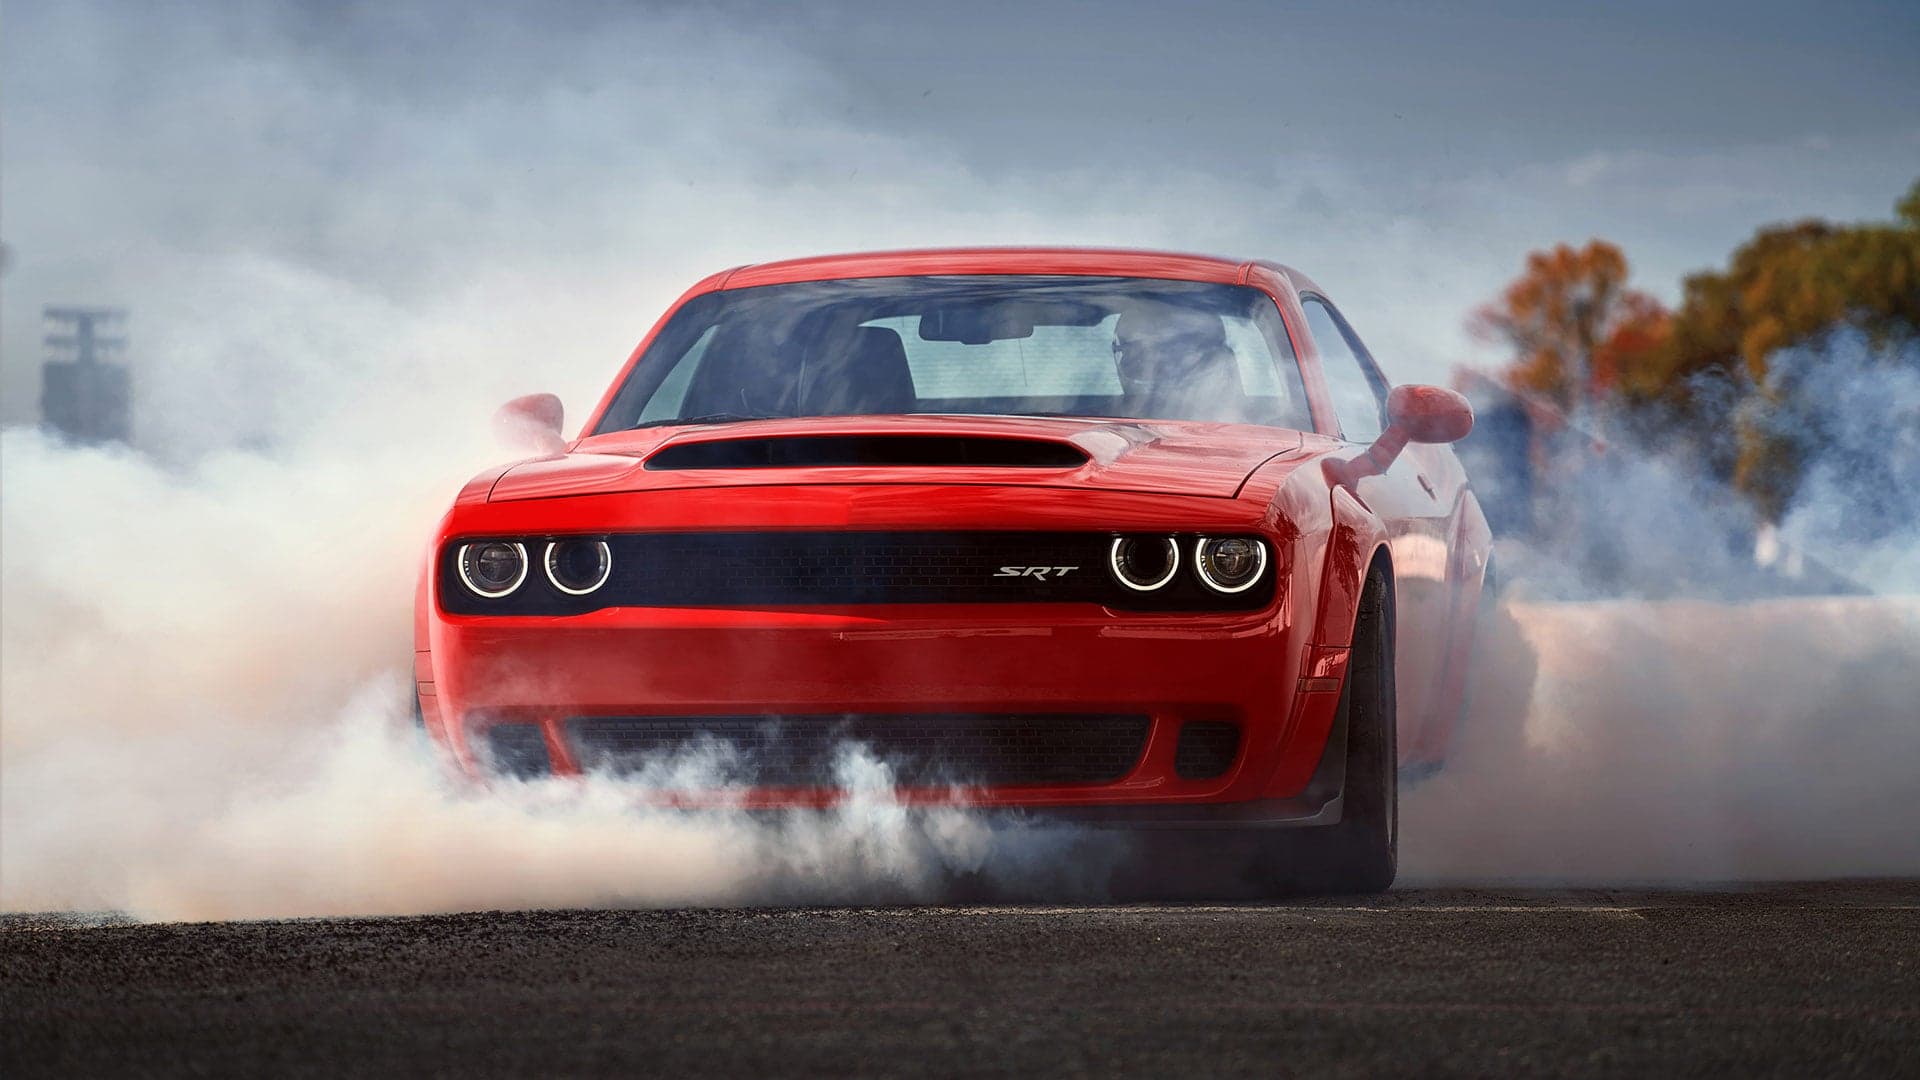 There’s a $250,000 Dodge Challenger SRT Demon For Sale On eBay